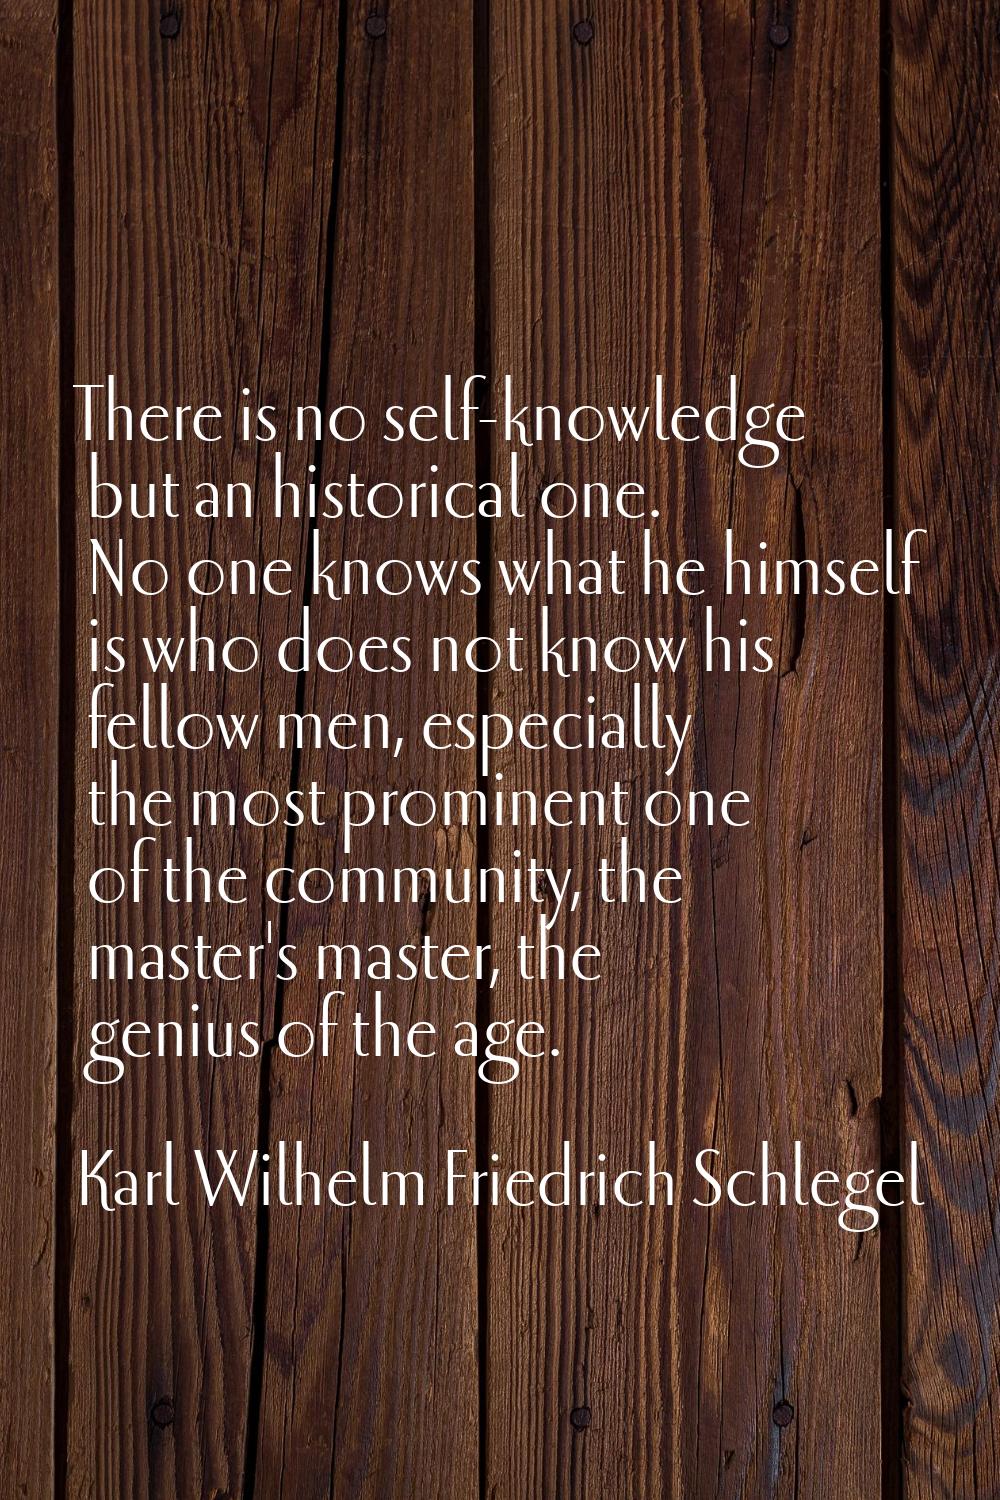 There is no self-knowledge but an historical one. No one knows what he himself is who does not know